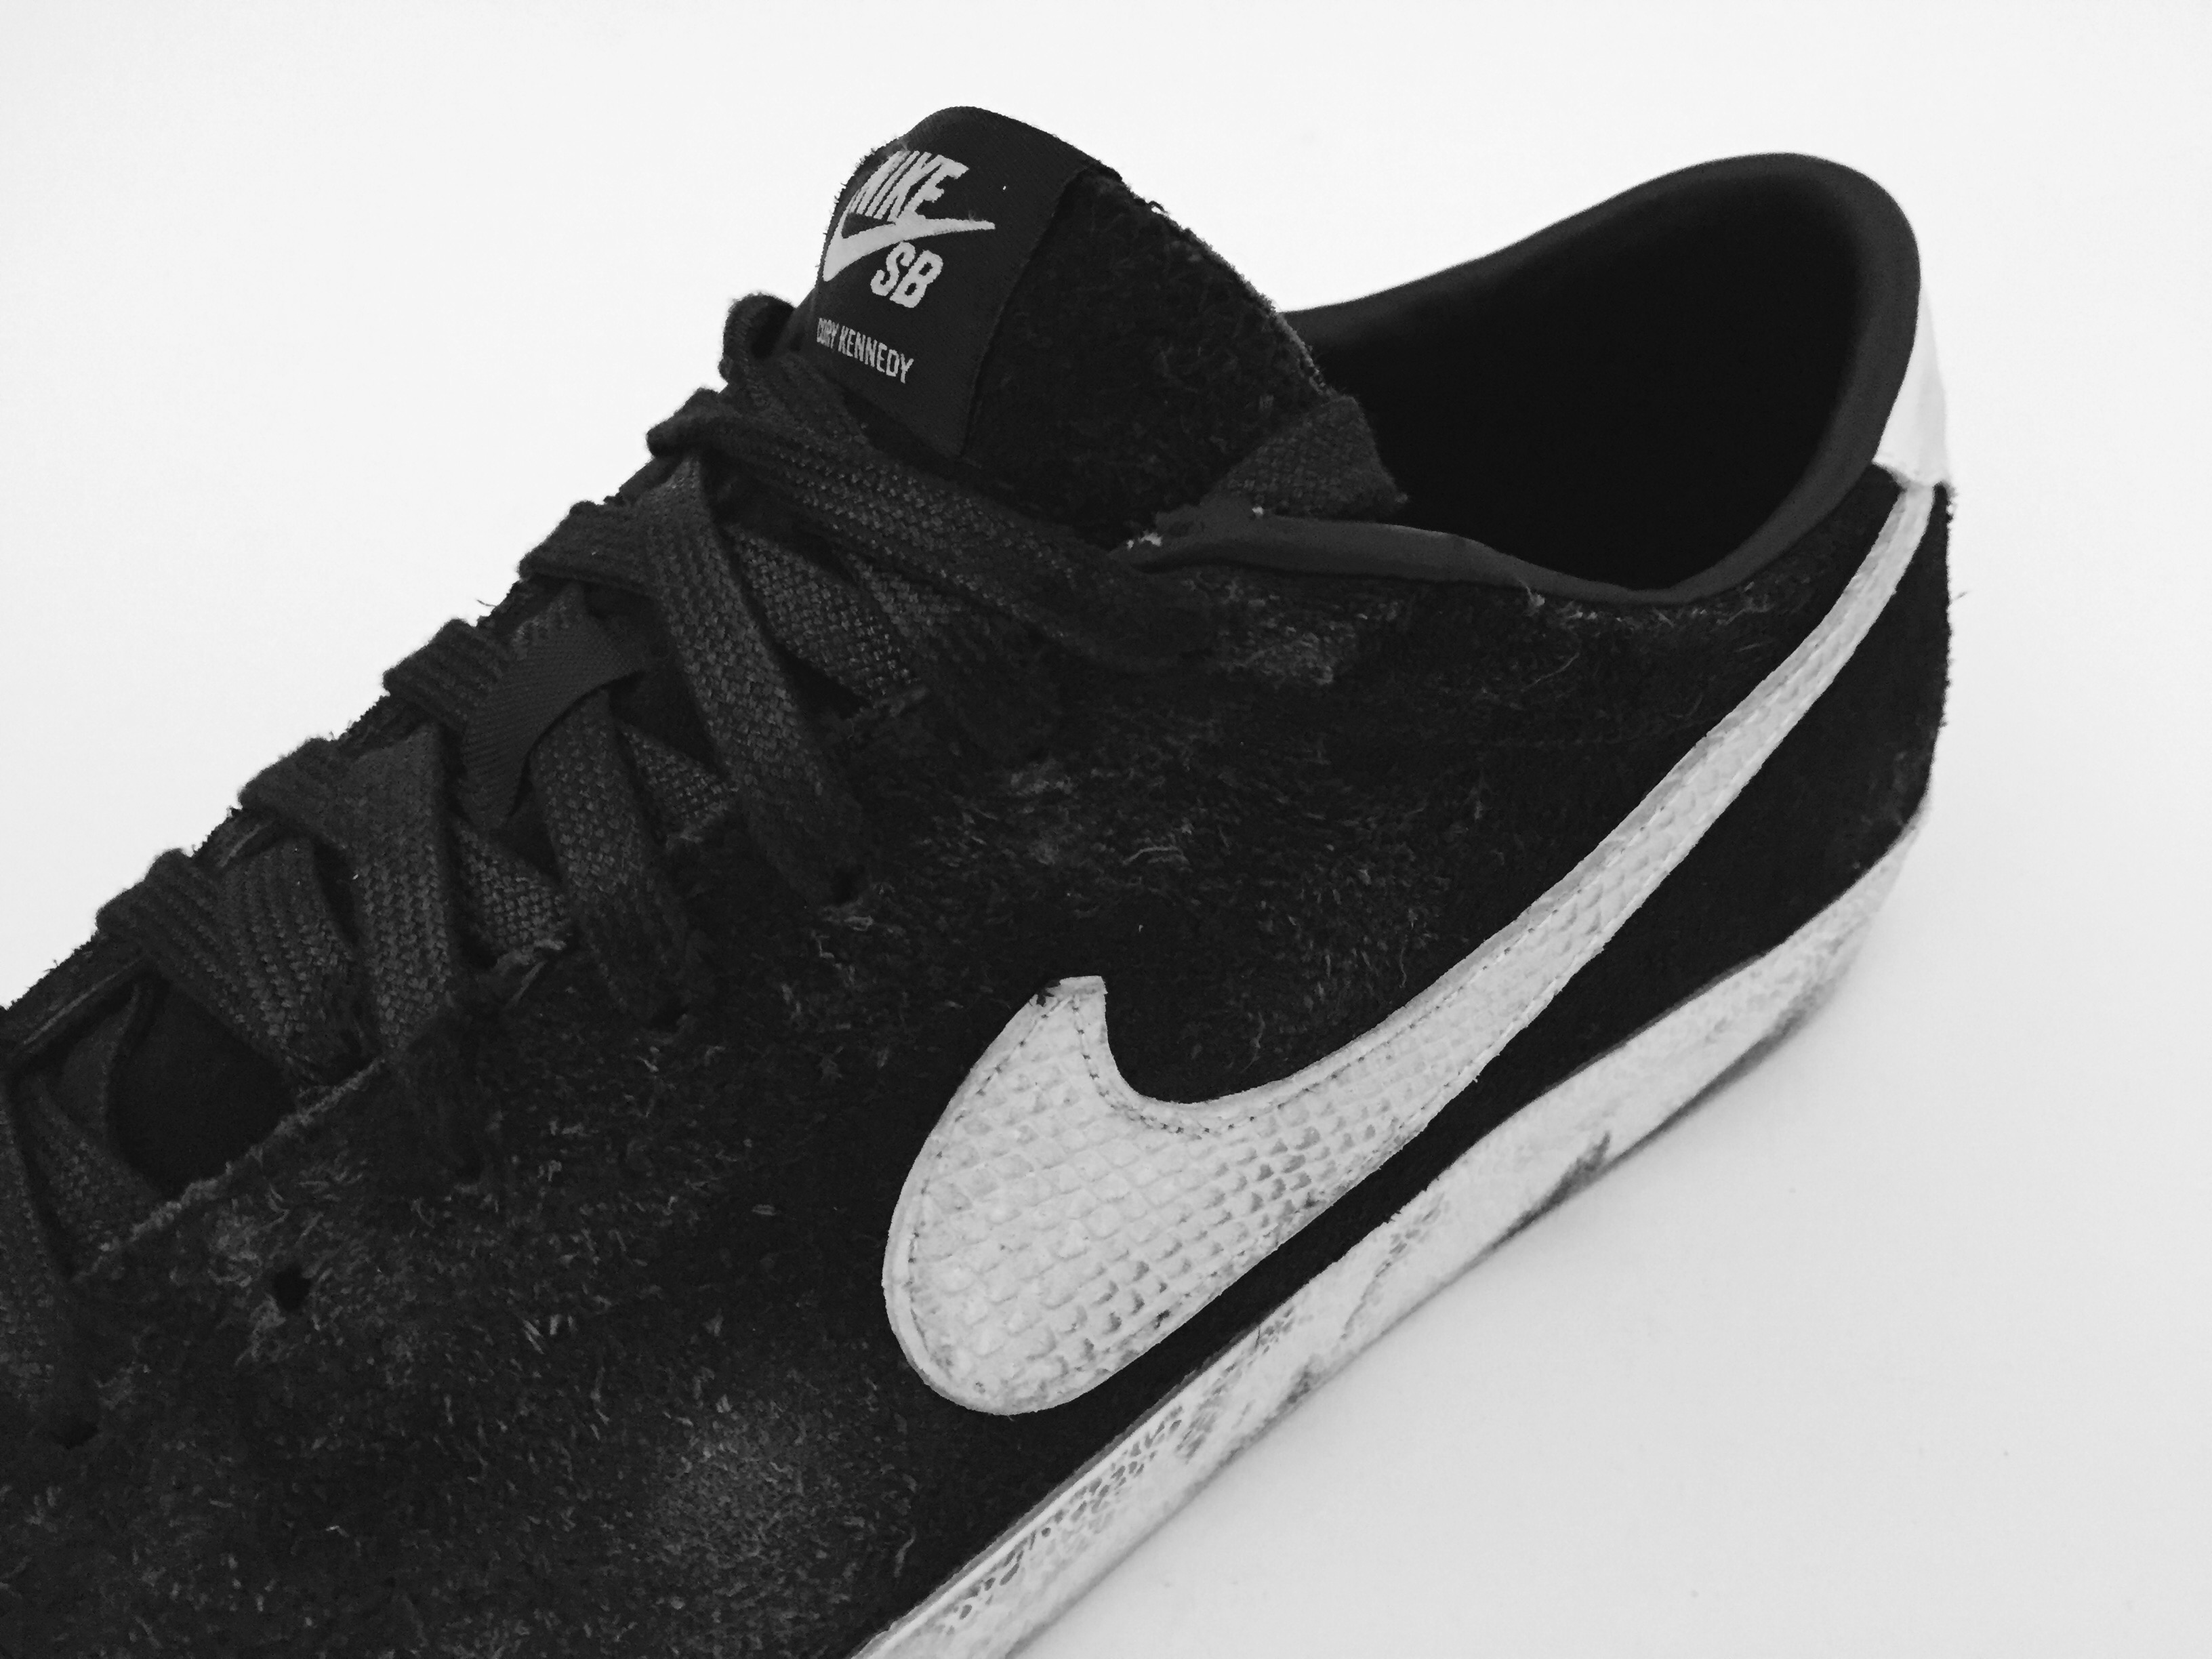 Nike SB All Court Cory Kennedy - Weartested - detailed skate shoe reviews